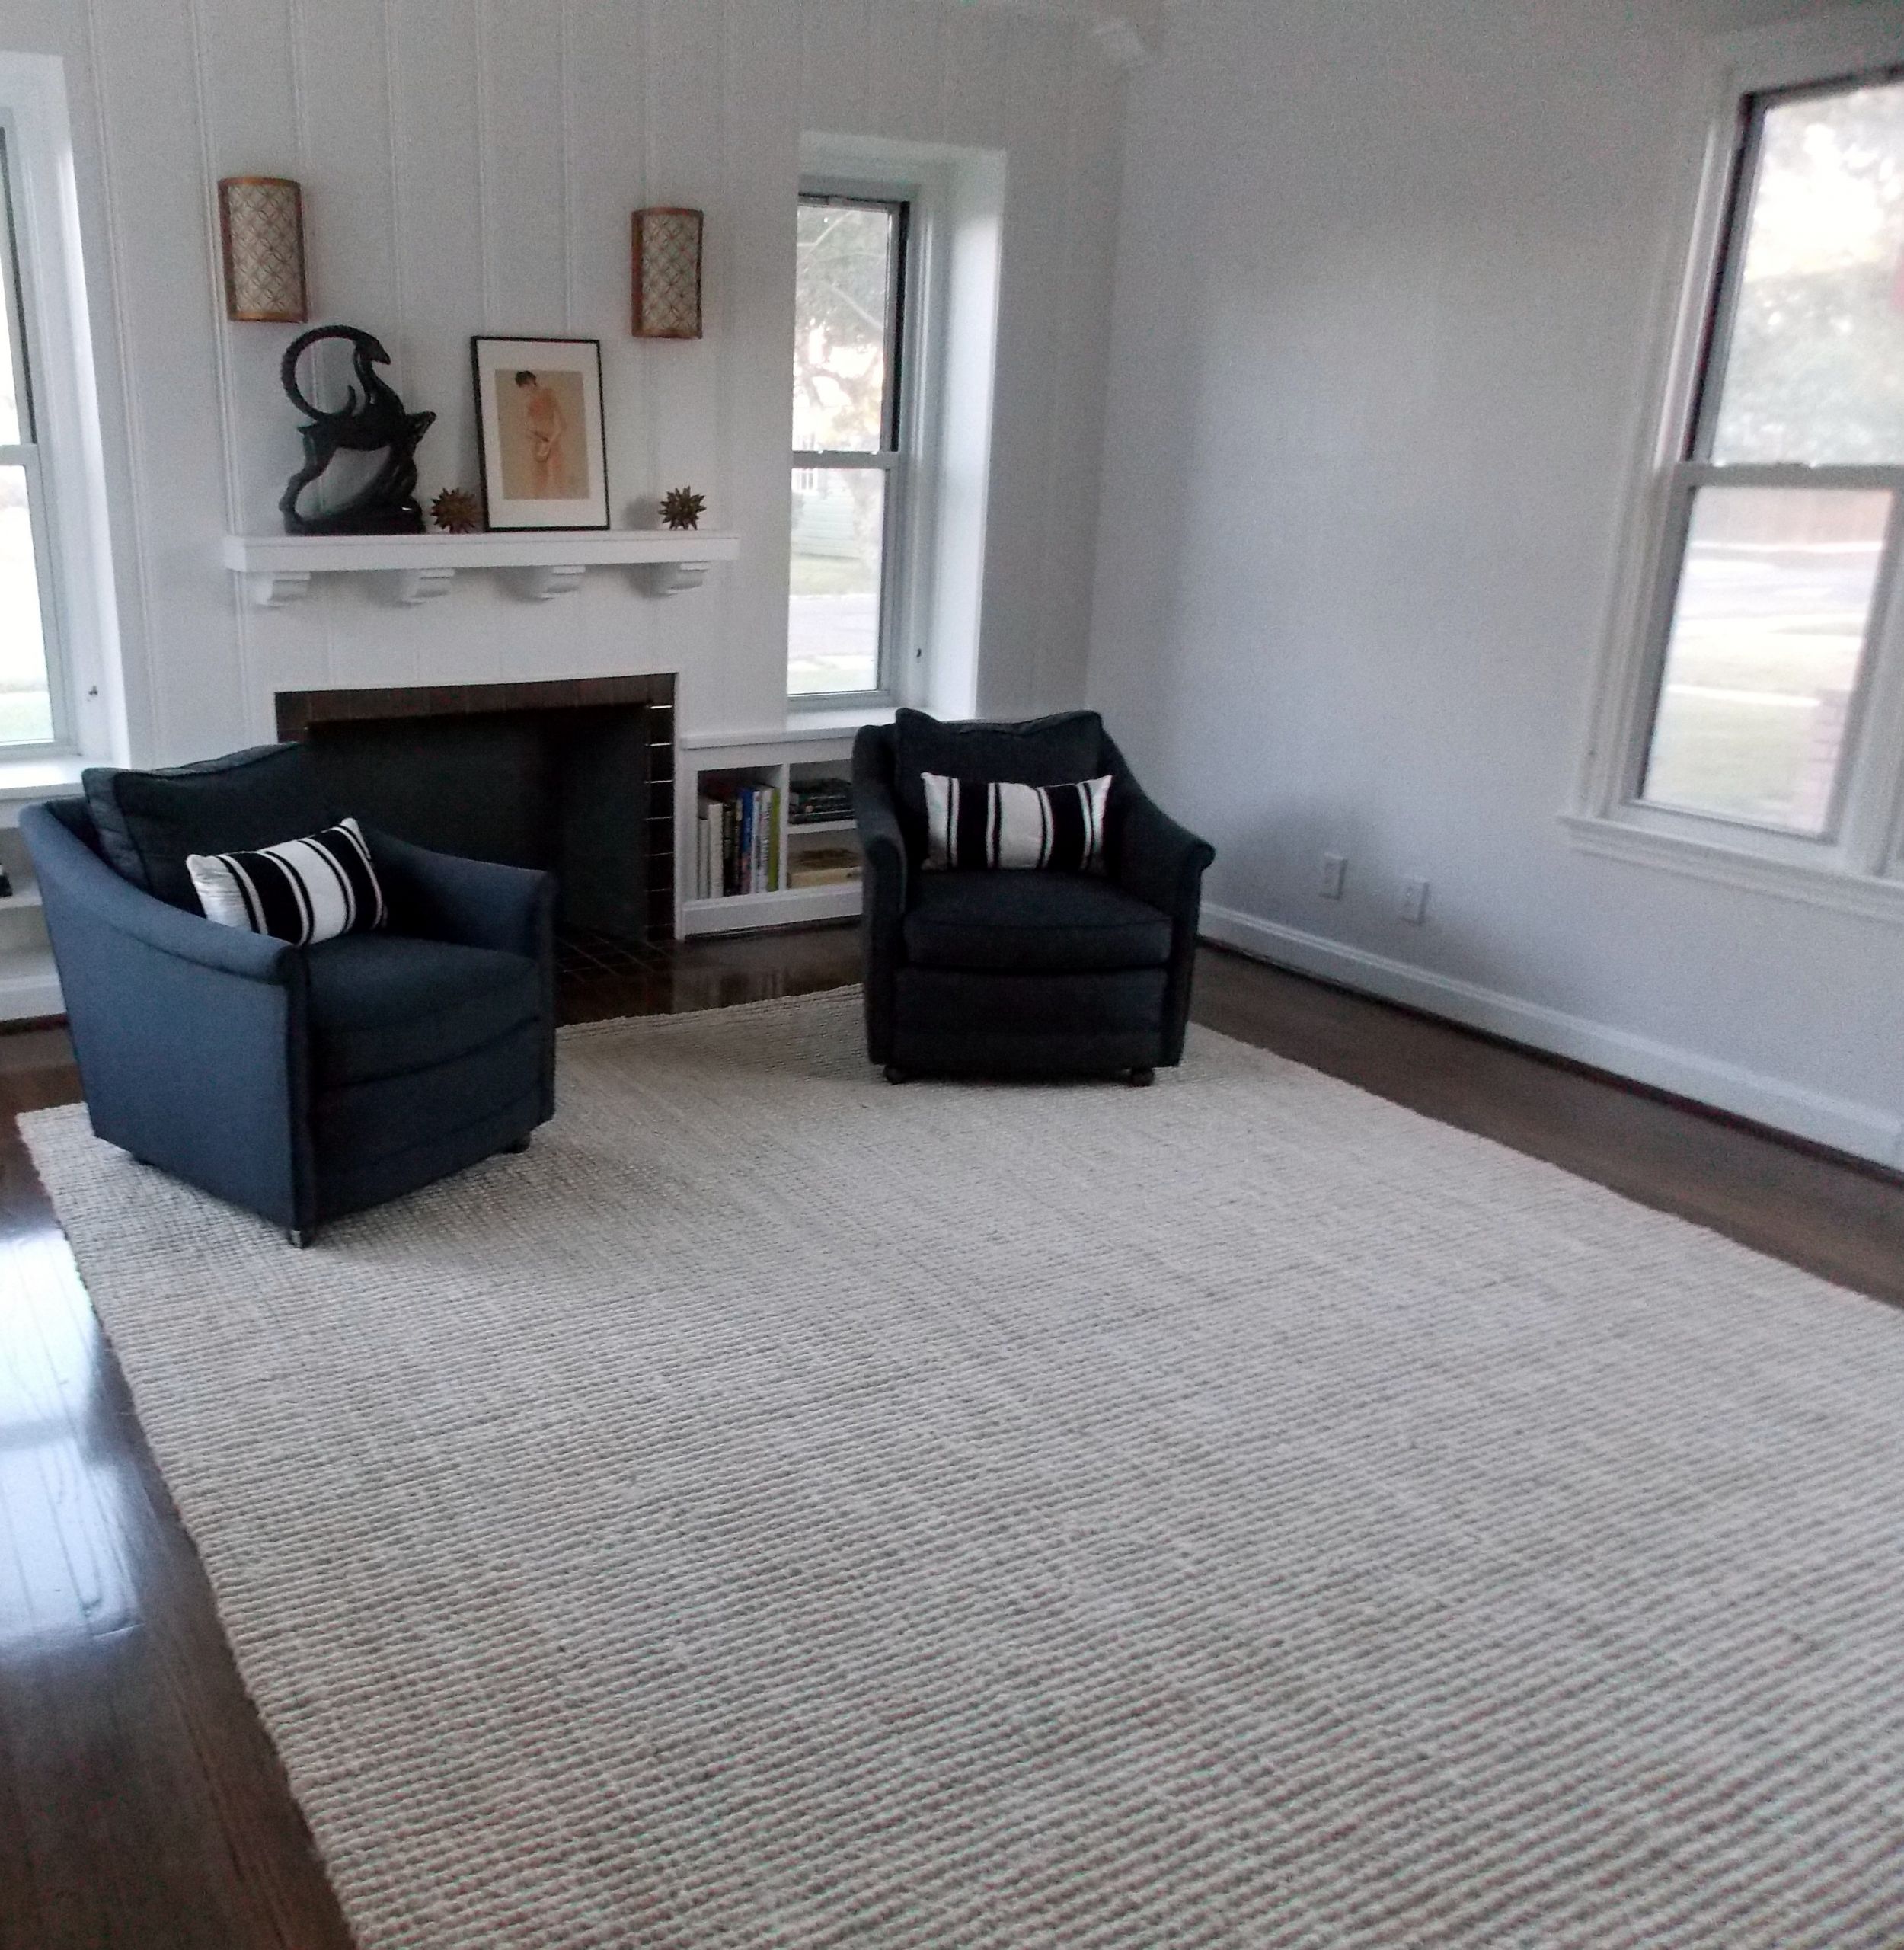 Jute Rug Living Room
 Easy Tips How To Clean Up Your Beautiful Jute Rugs Without